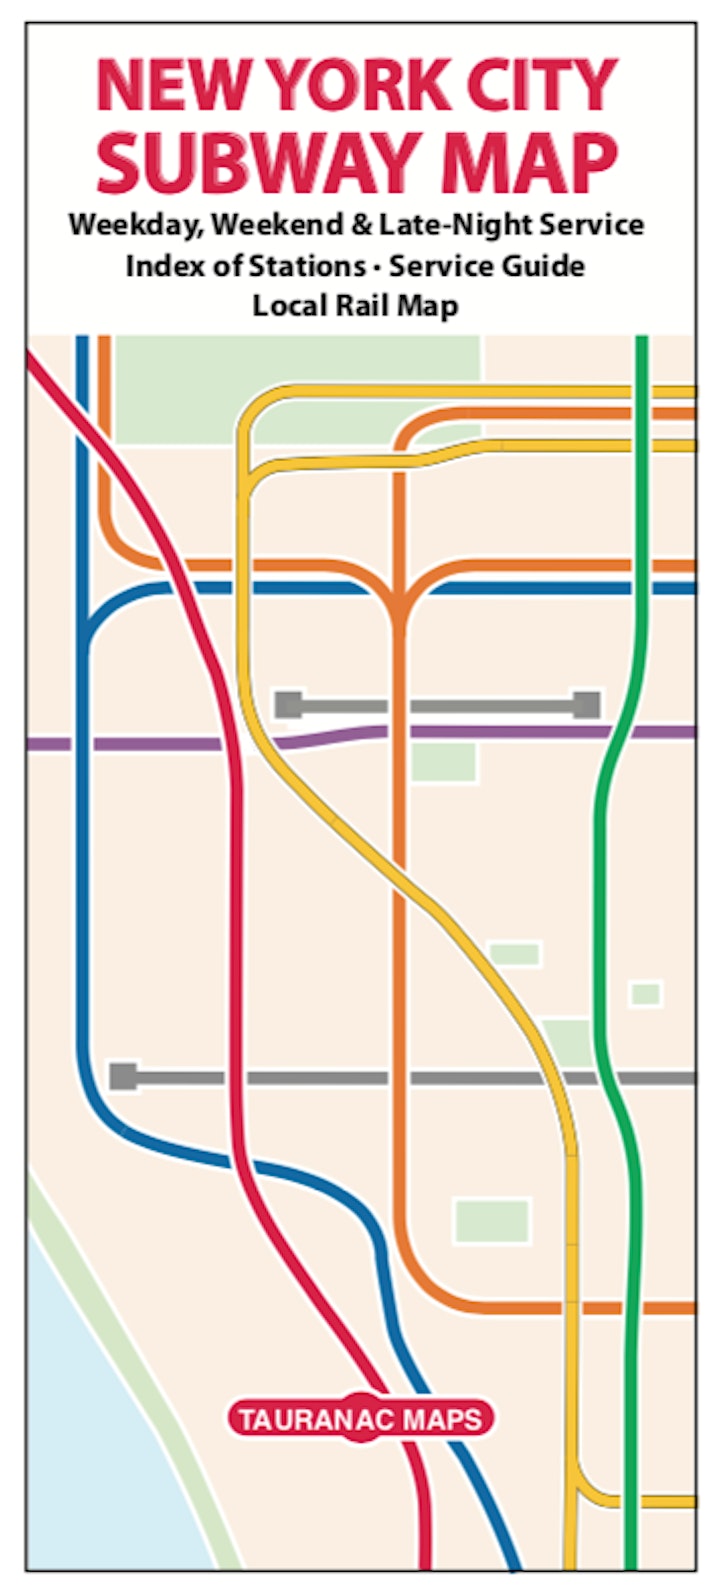 Subway Maps: The Good, the Bad, and the  Better? image